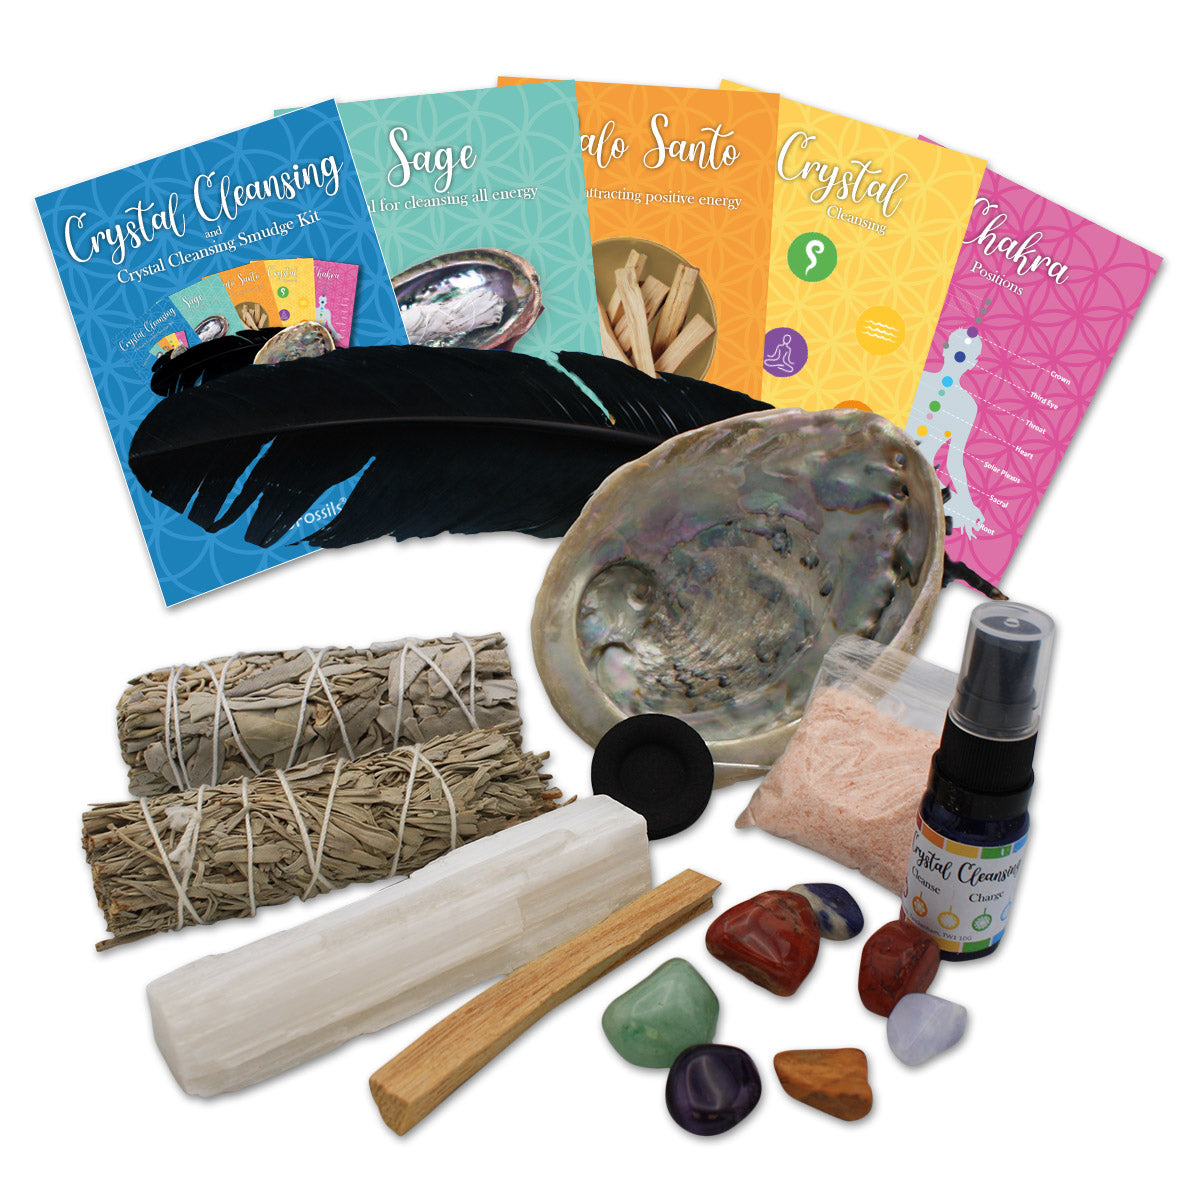 5 Information booklets, feather, 2 sage, spray bottle, 7 crystals are green, red, purple, white and orange